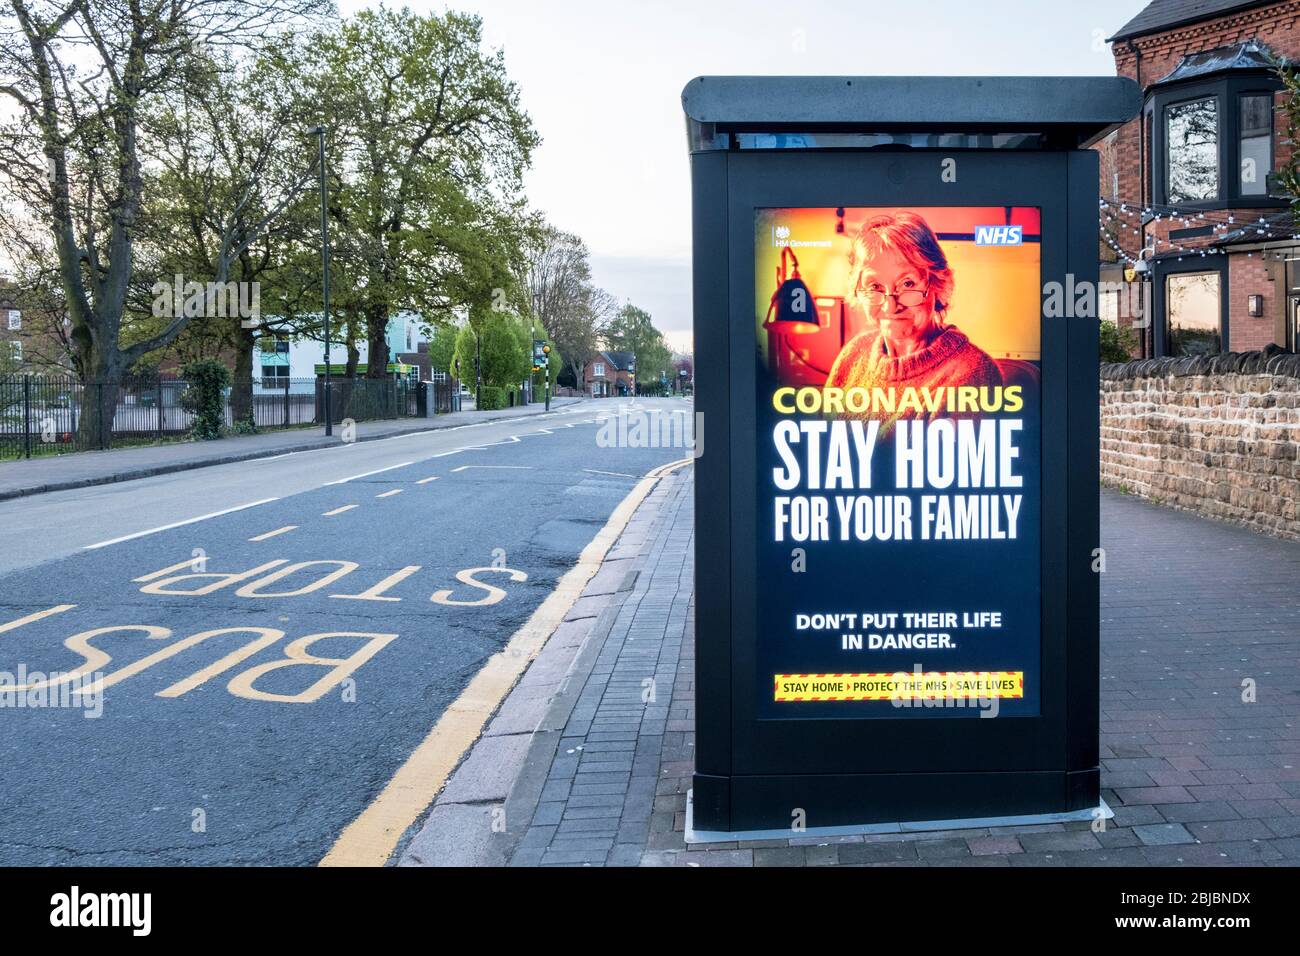 Stay home for your family message showing an older person. Covid-19 Coronavirus lockdown message on an empty street, Nottinghamshire, England, UK Stock Photo